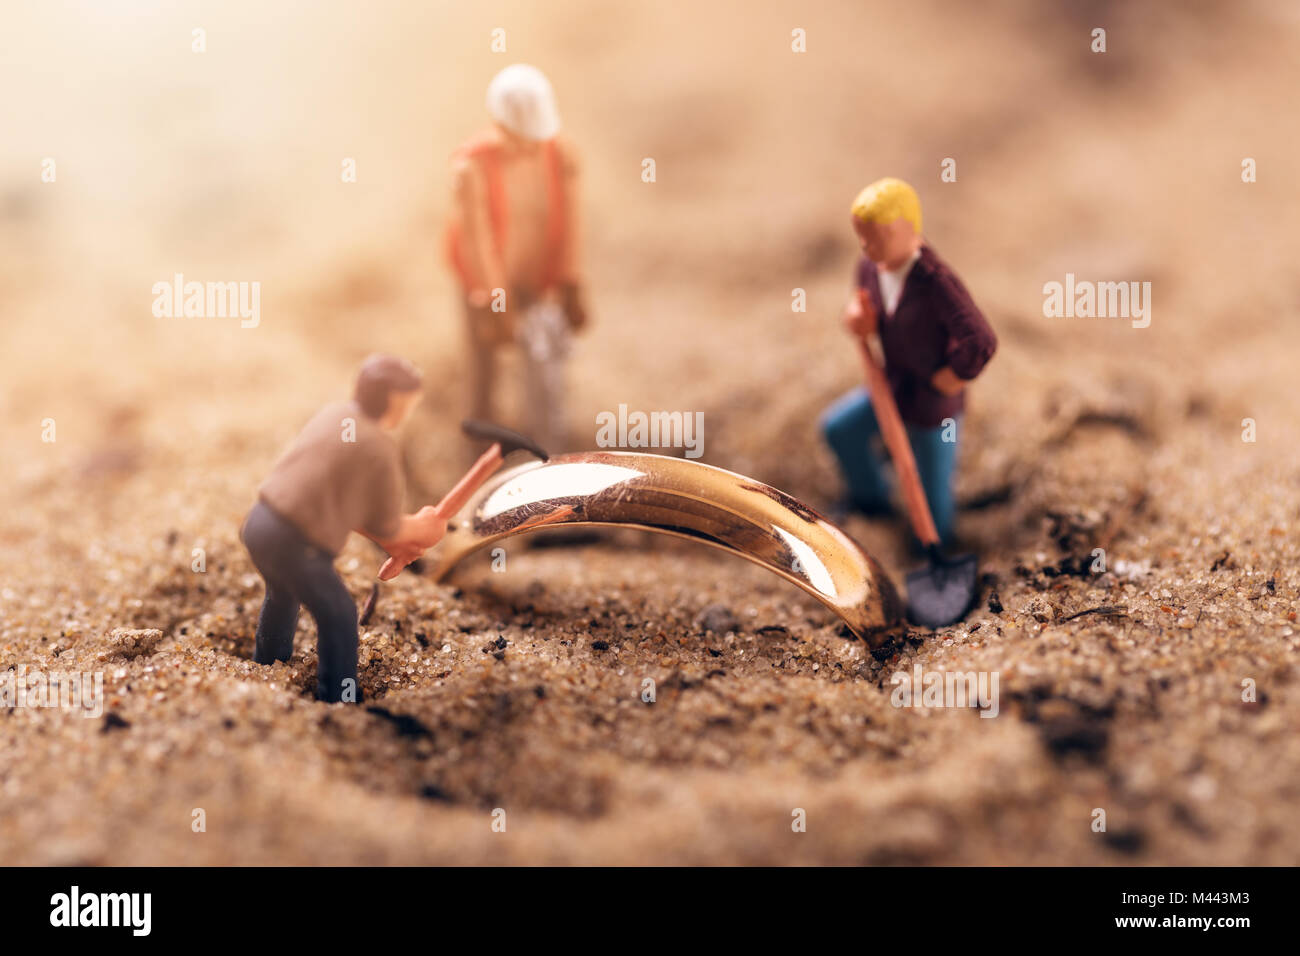 gold digging or archaeology concept Stock Photo